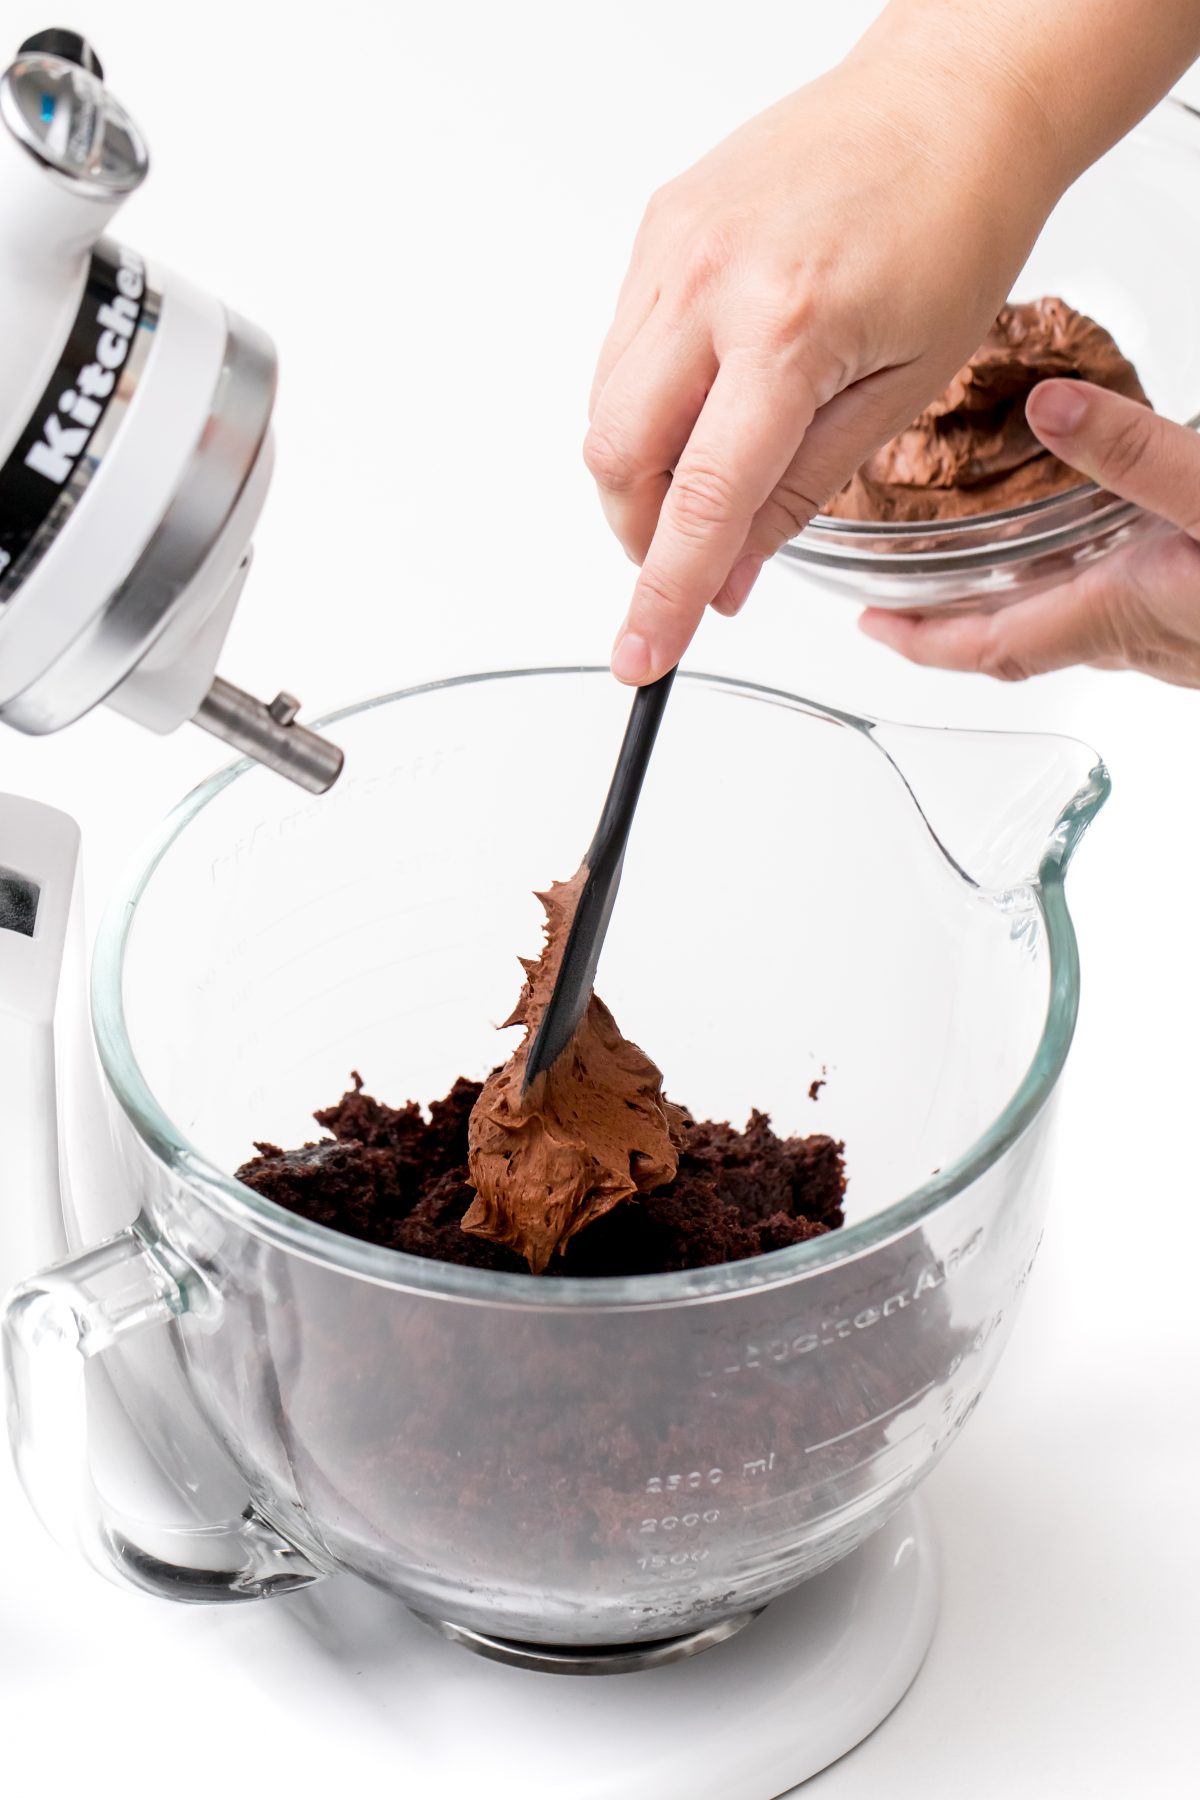 Add in chocolate buttercream frosting gradually and blend until it forms a dough